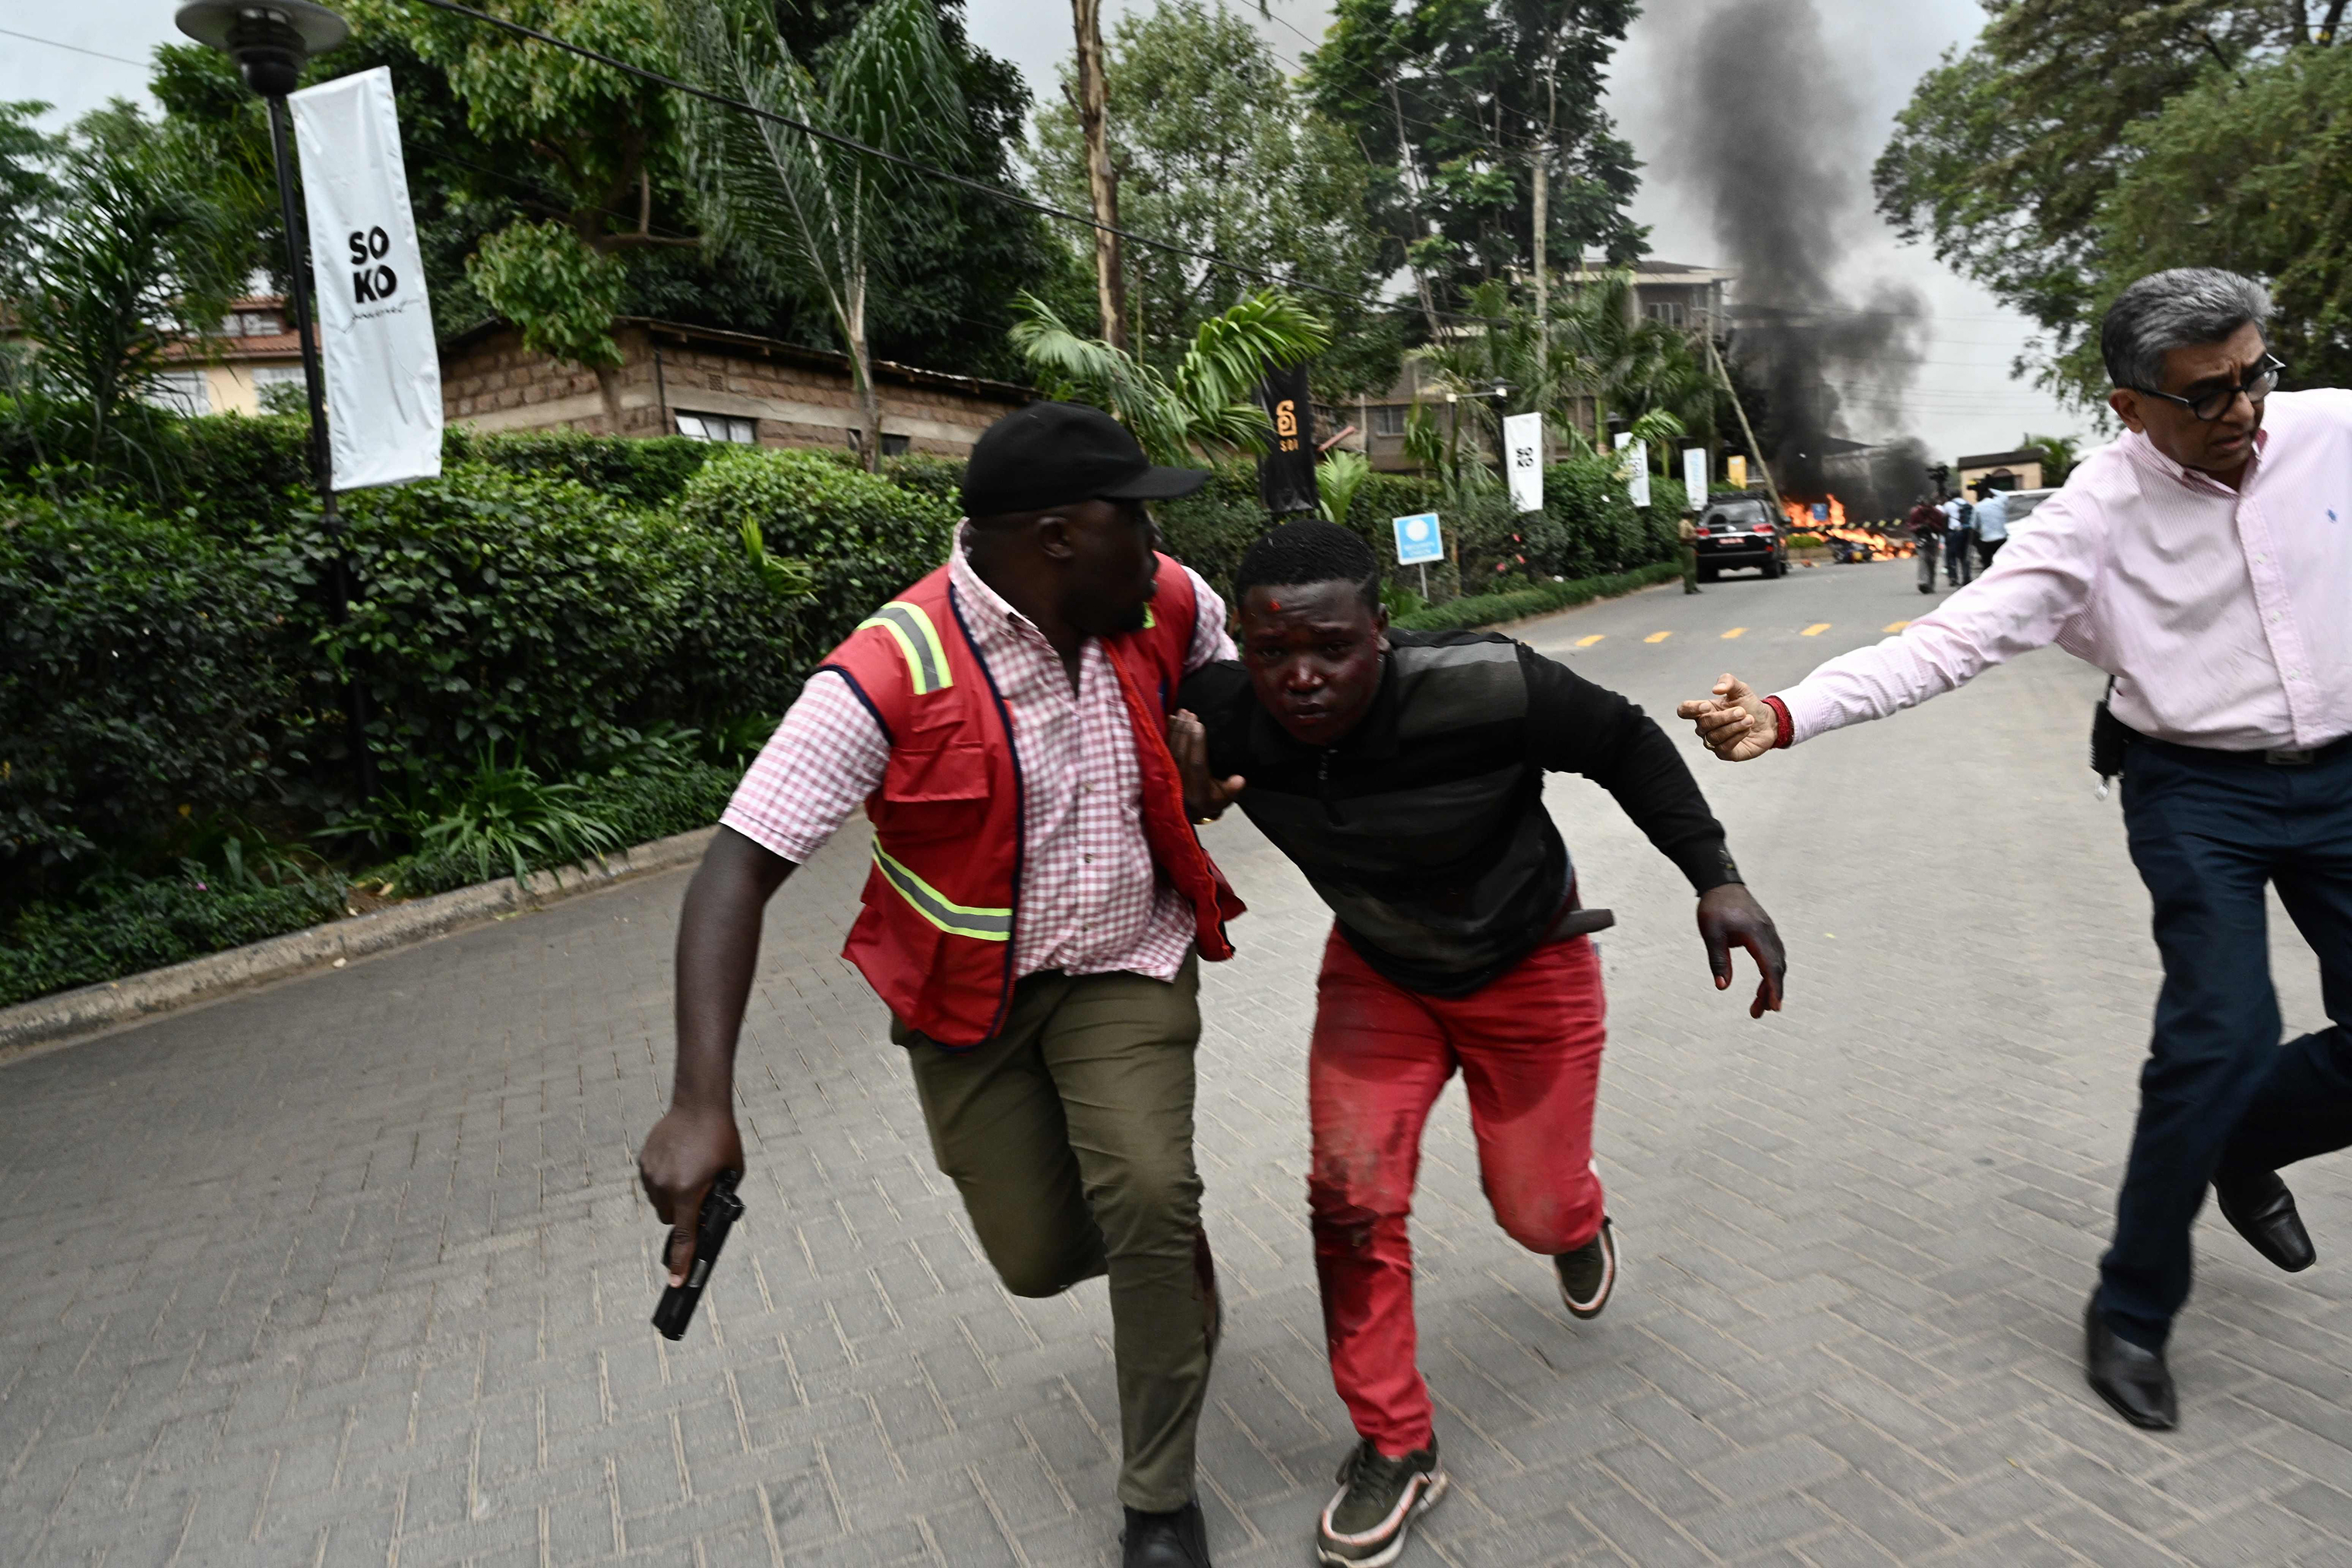 An injured man is evacuated from the scene of an explosion at a hotel complex in Nairobi. (Simon Maina—AFP/Getty Images)